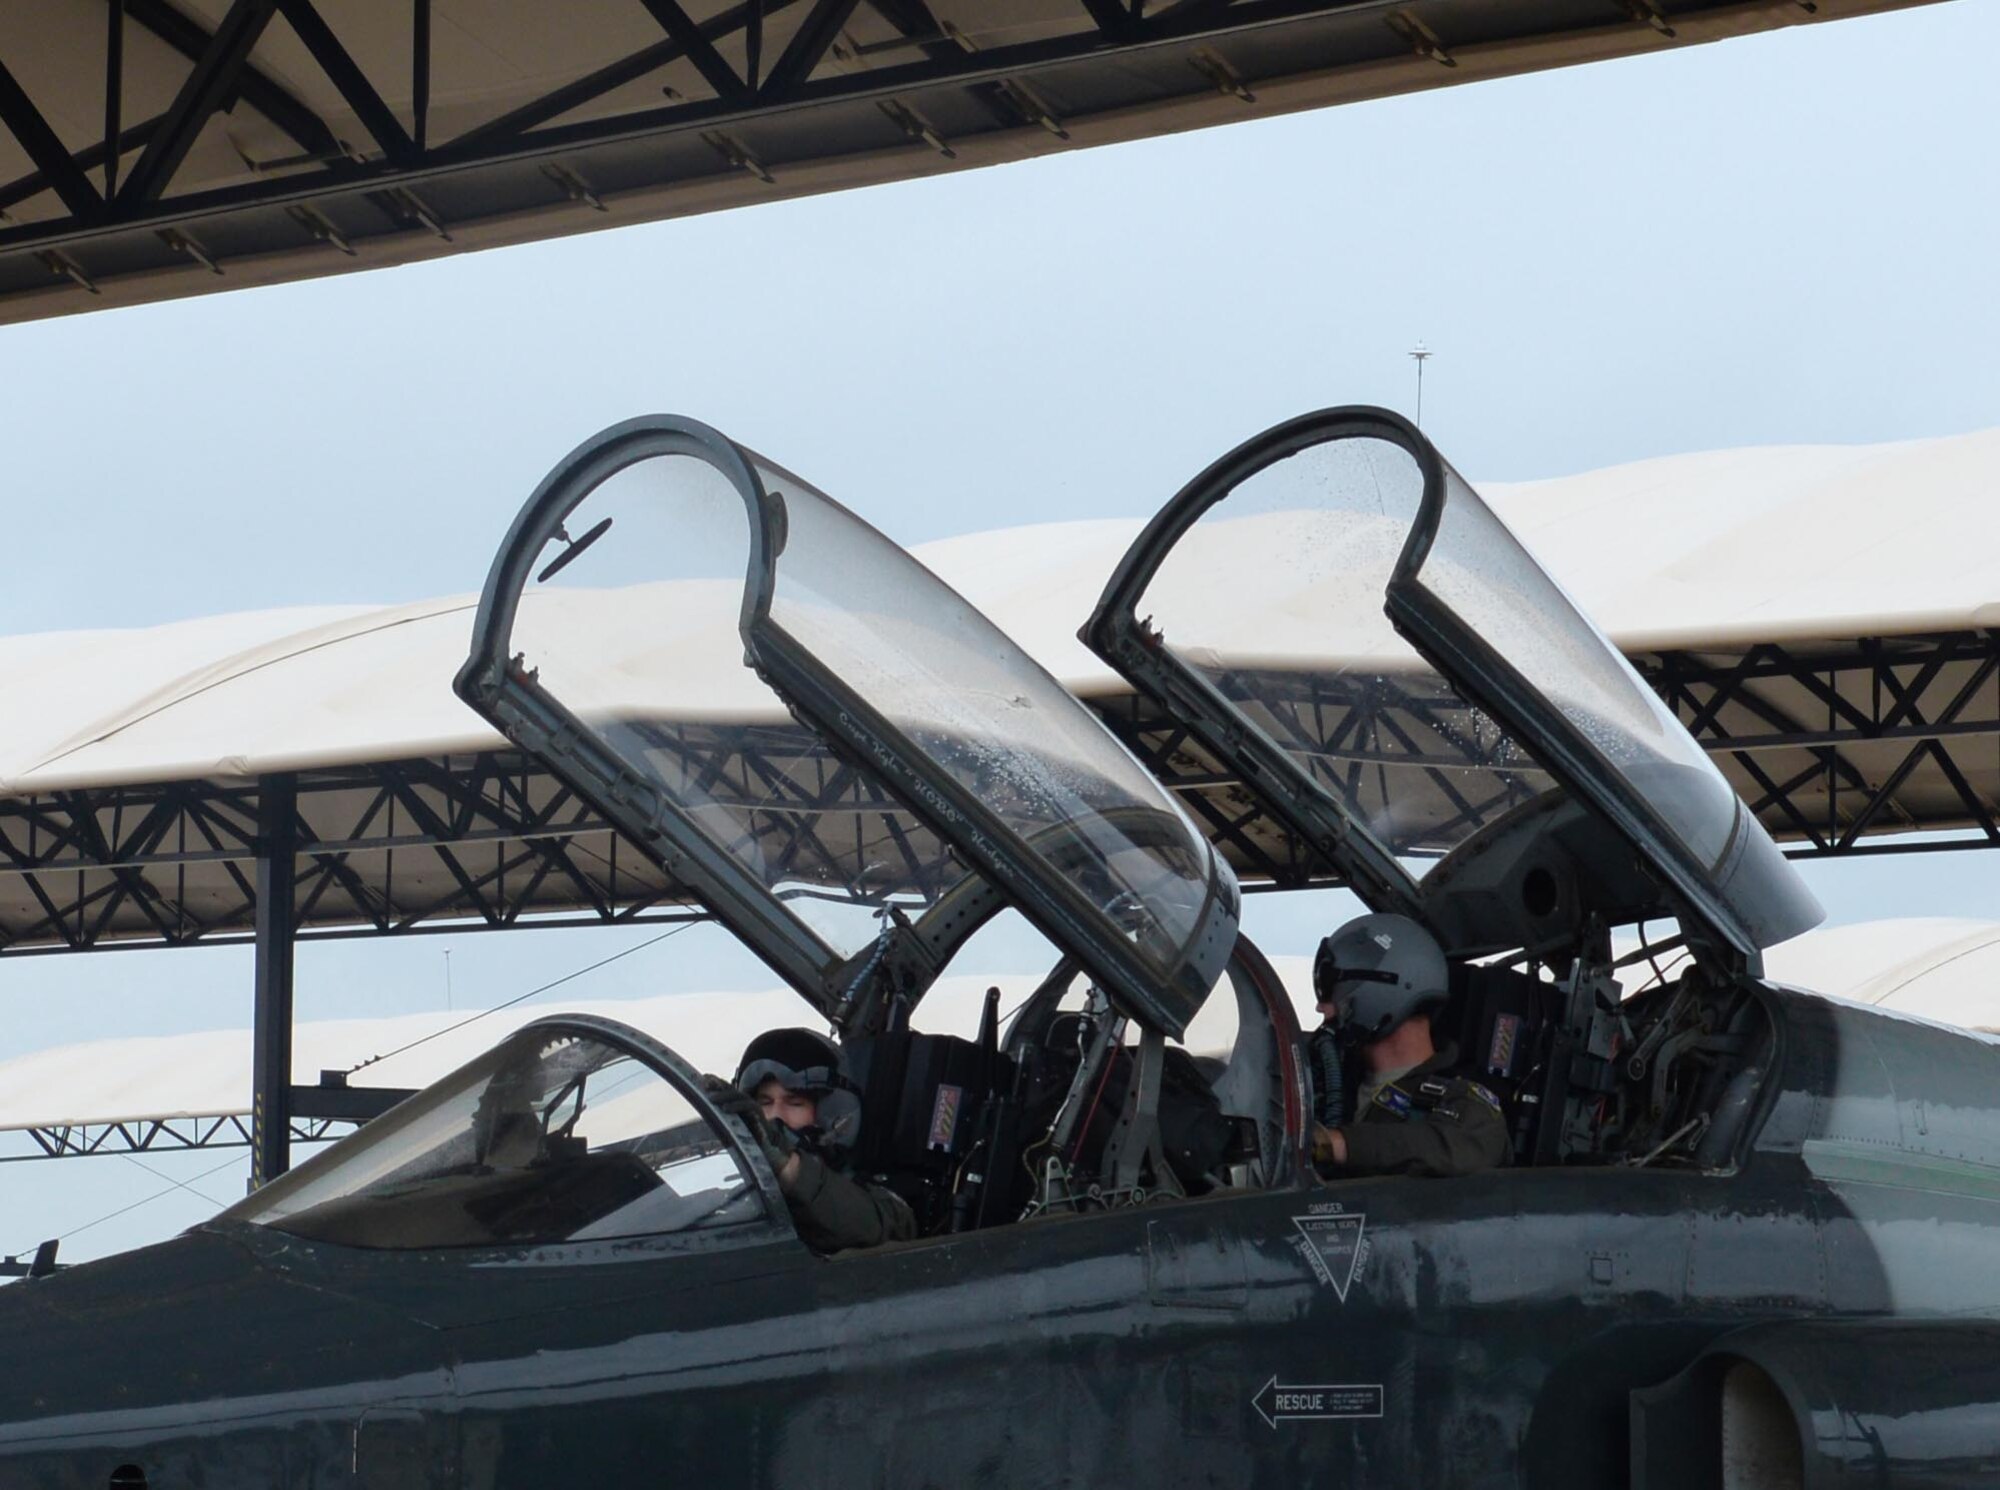 Two 14th Flying Training Wing pilots sit in the cockpit of a T-38 Talon April 8, 2020, at Columbus Air Force Base, Miss. Pilot training has been deemed essential operations and continues amid the COVID-19 pandemic. (U.S. Air Force photo by Airman 1st Class Davis Donaldson)